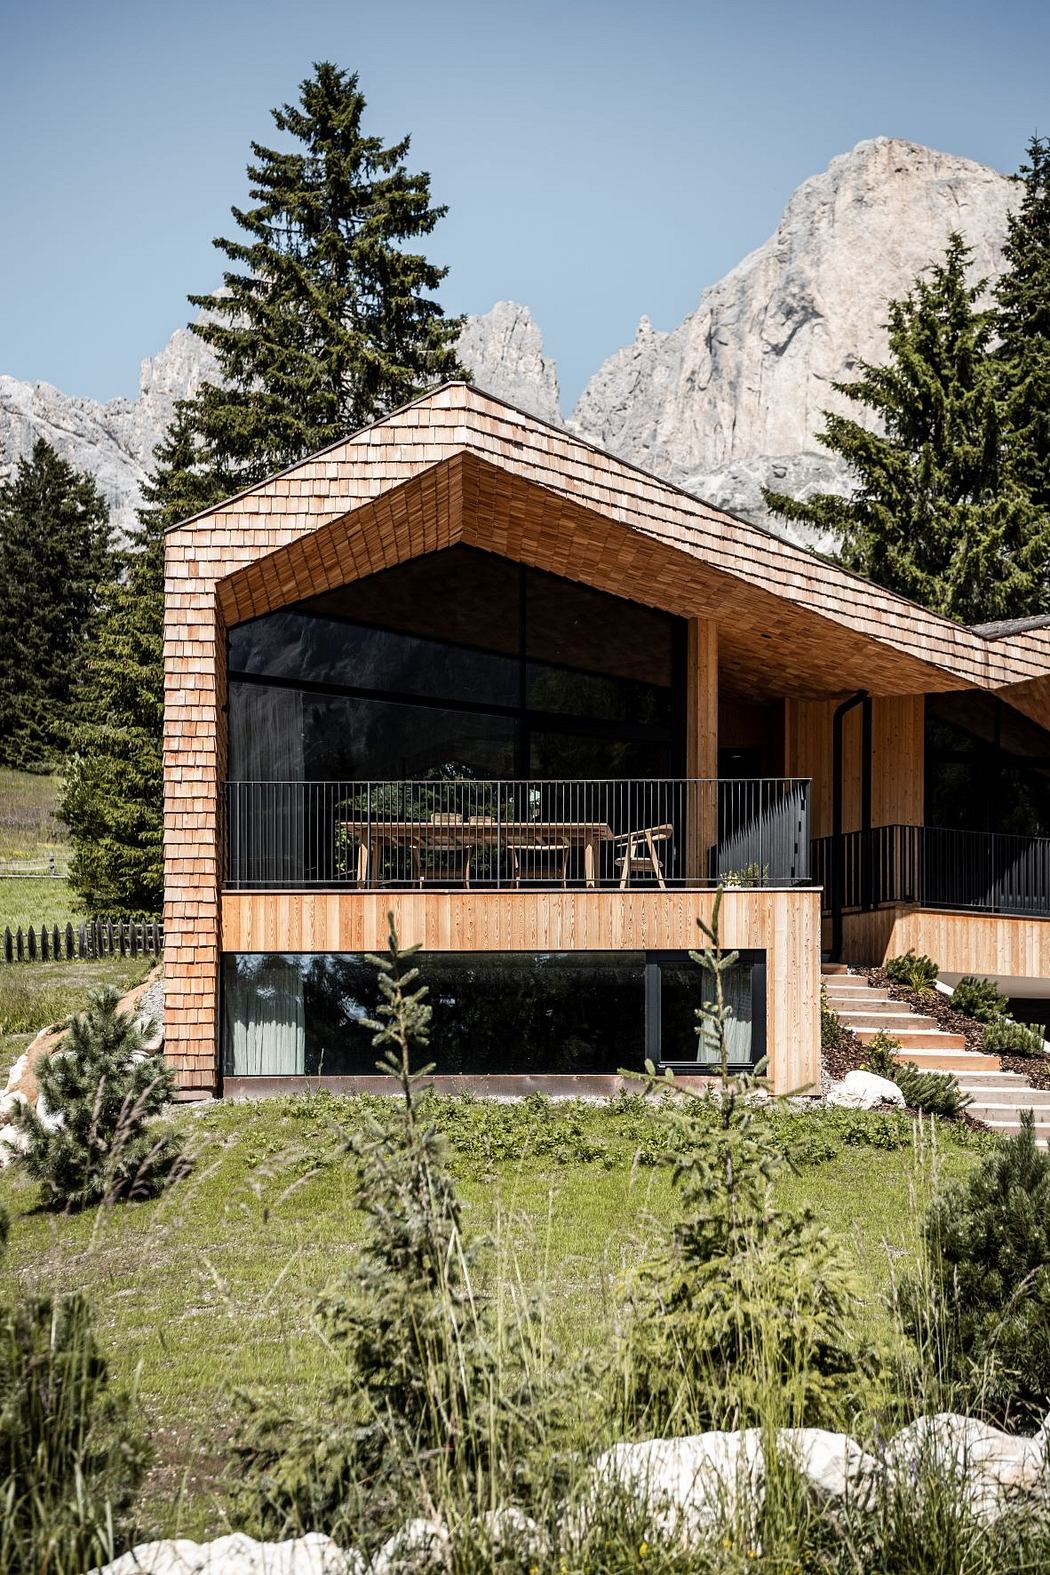 Modern wooden house with large windows against mountain backdrop.